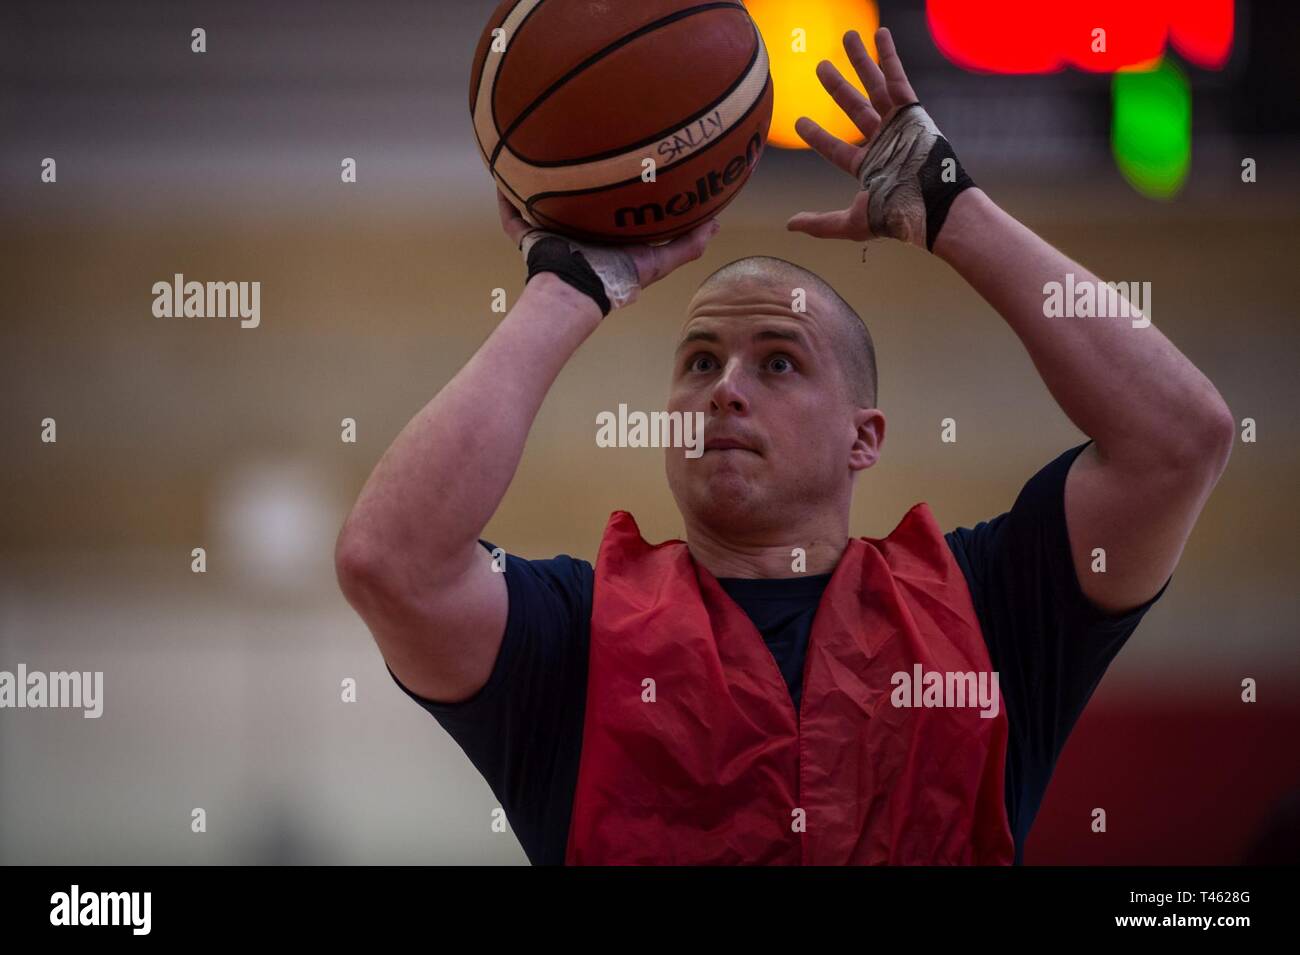 A U.S. Marine Corps athlete shoots a basketball during the 2019 Marine Corps Trials at Marine Corps Base Camp Pendleton, California, Feb. 28. The Marine Corps Trials promotes recovery and rehabilitation through adaptive sports participation and develops camaraderie among recovering service members and veterans. Additionally, the competition is an opportunity for participants to demonstrate physical and mental achievements and serves as the primary venue to select Marine Corps participants for the DoD Warrior Games. Stock Photo